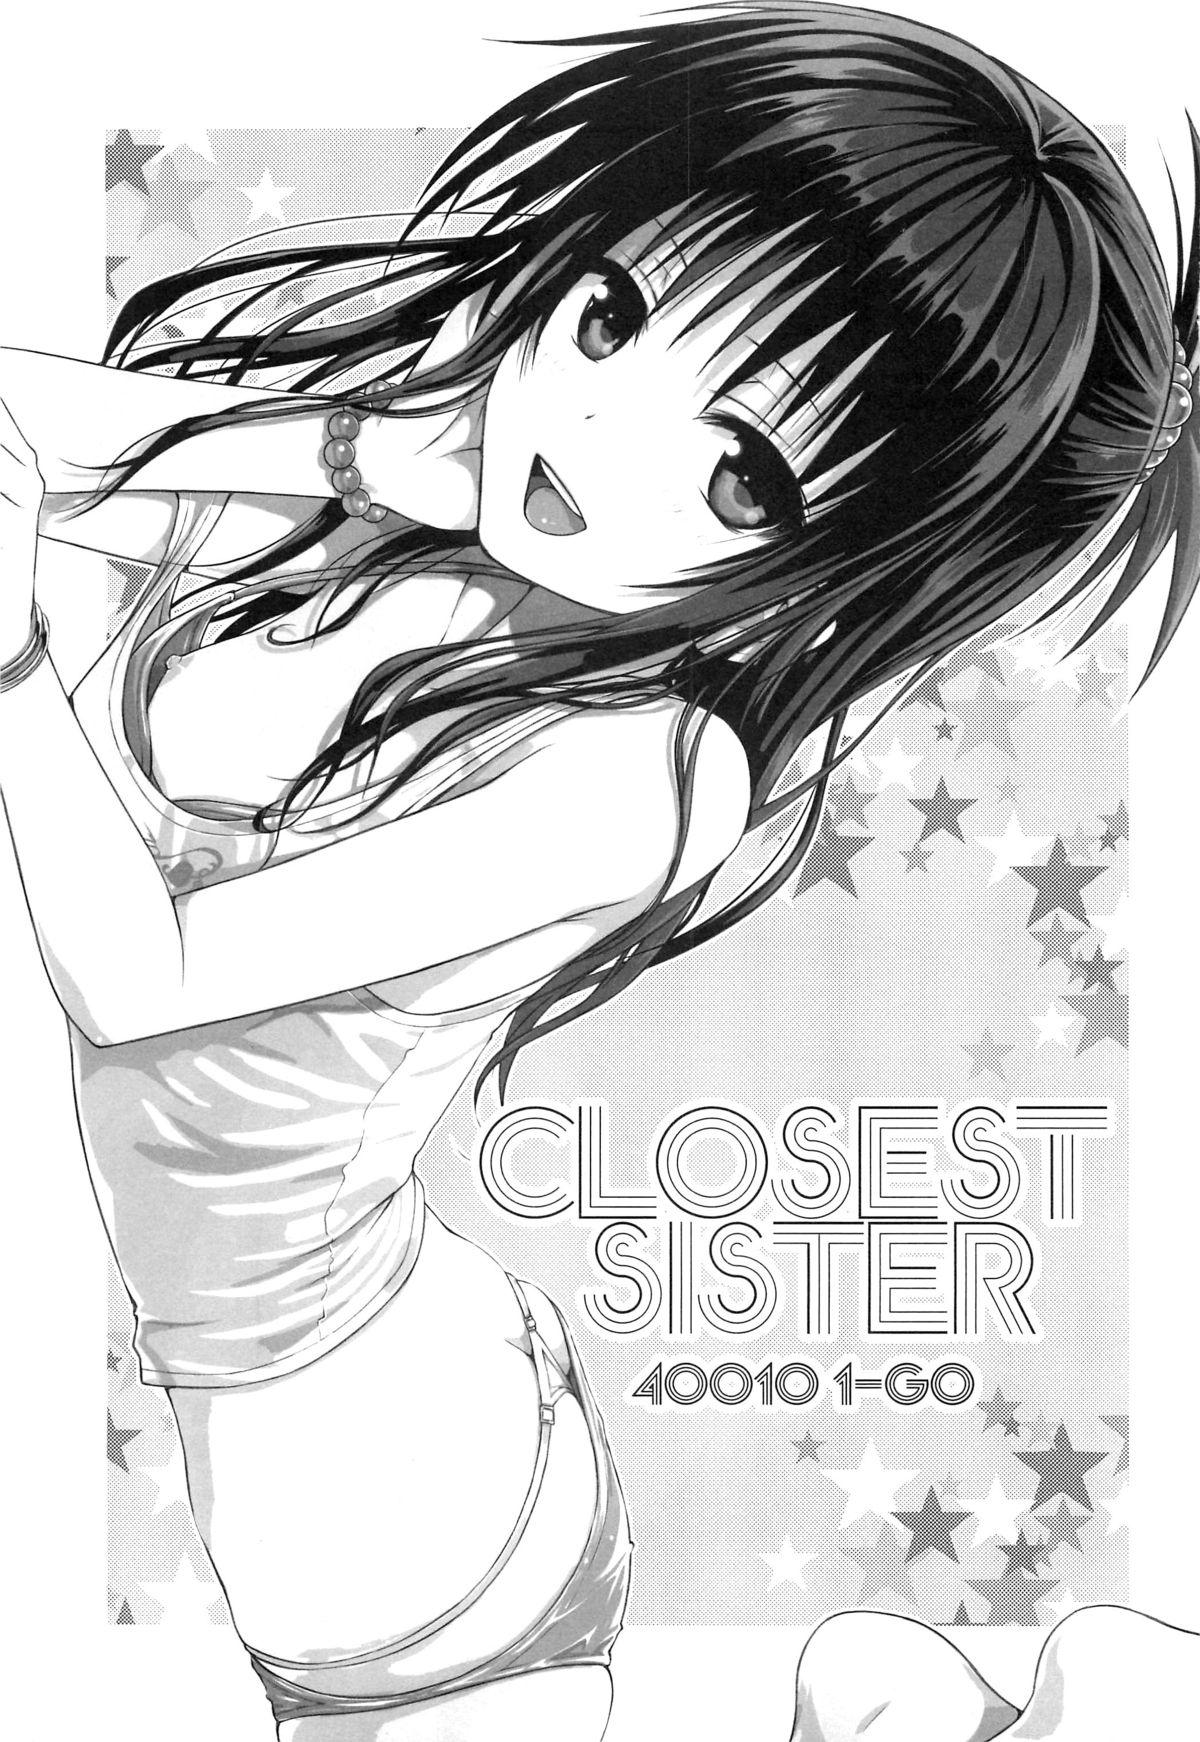 Closest Sister 1